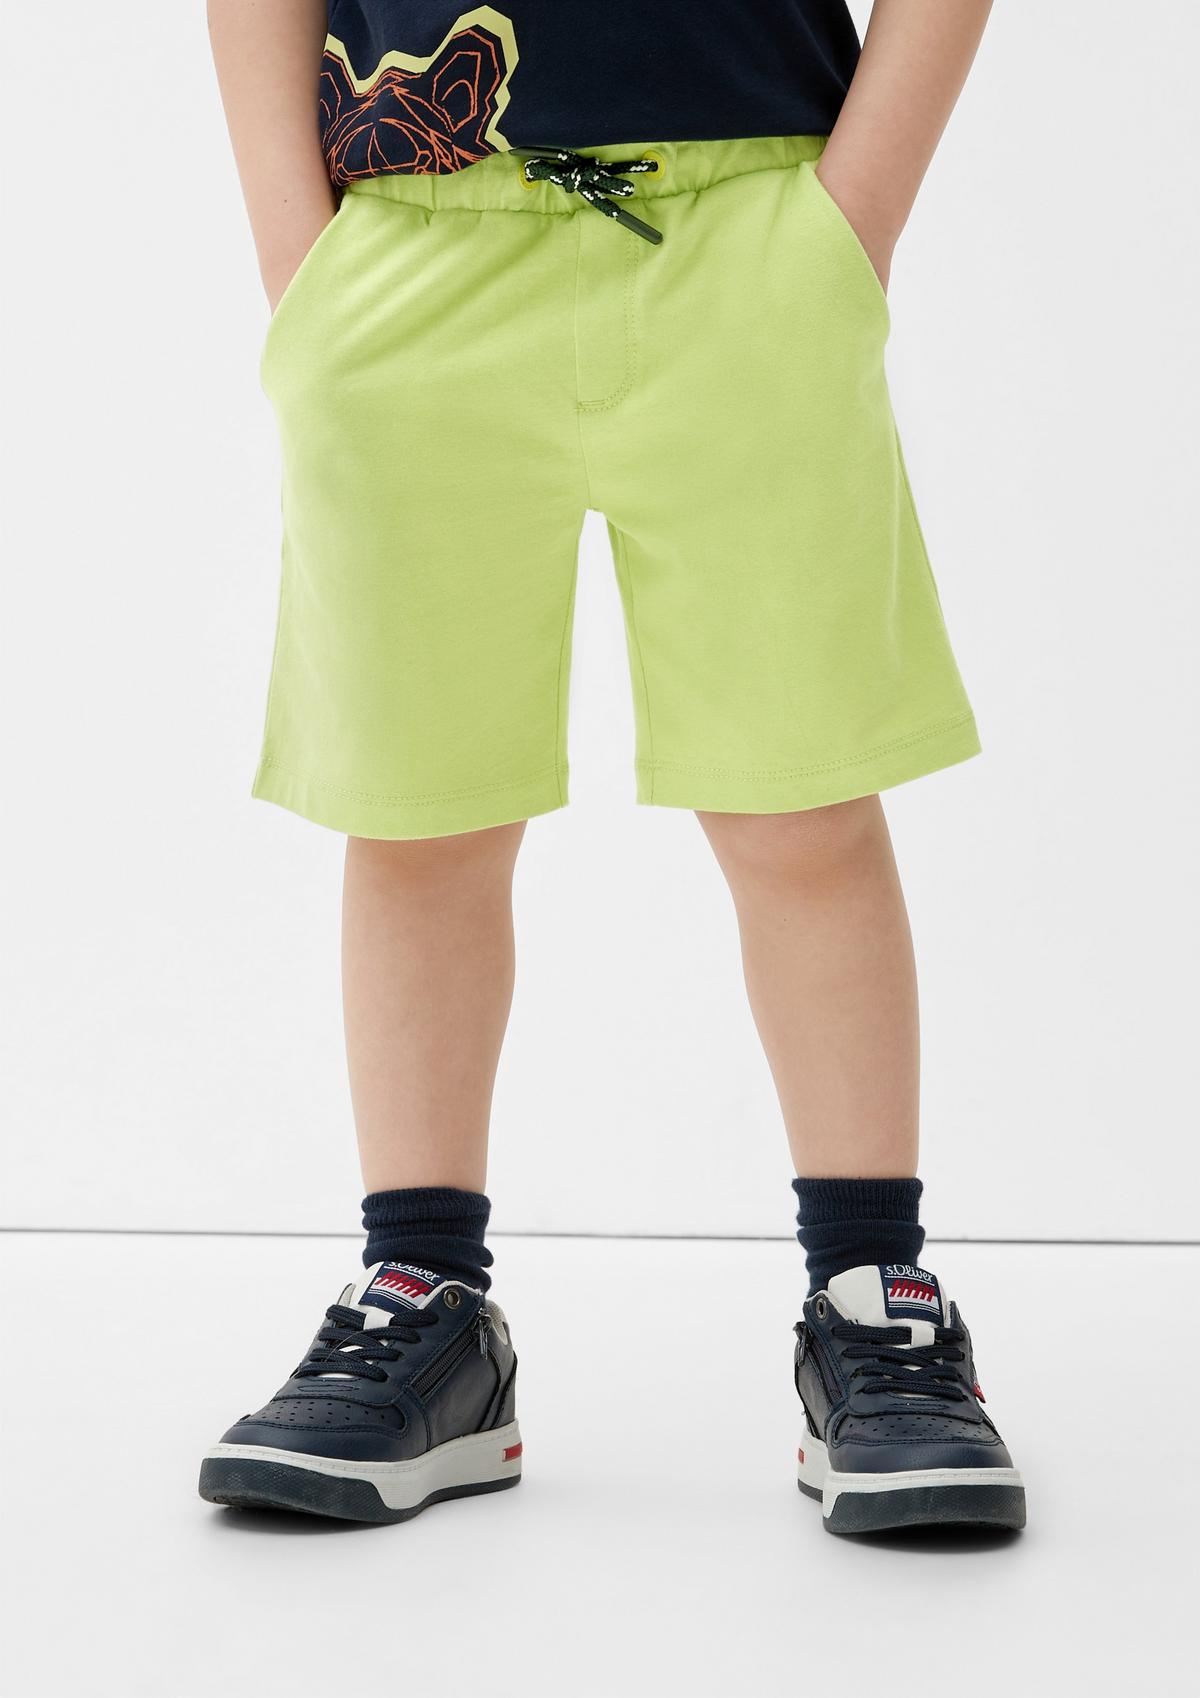 Find Bermuda shorts for boys teens online and